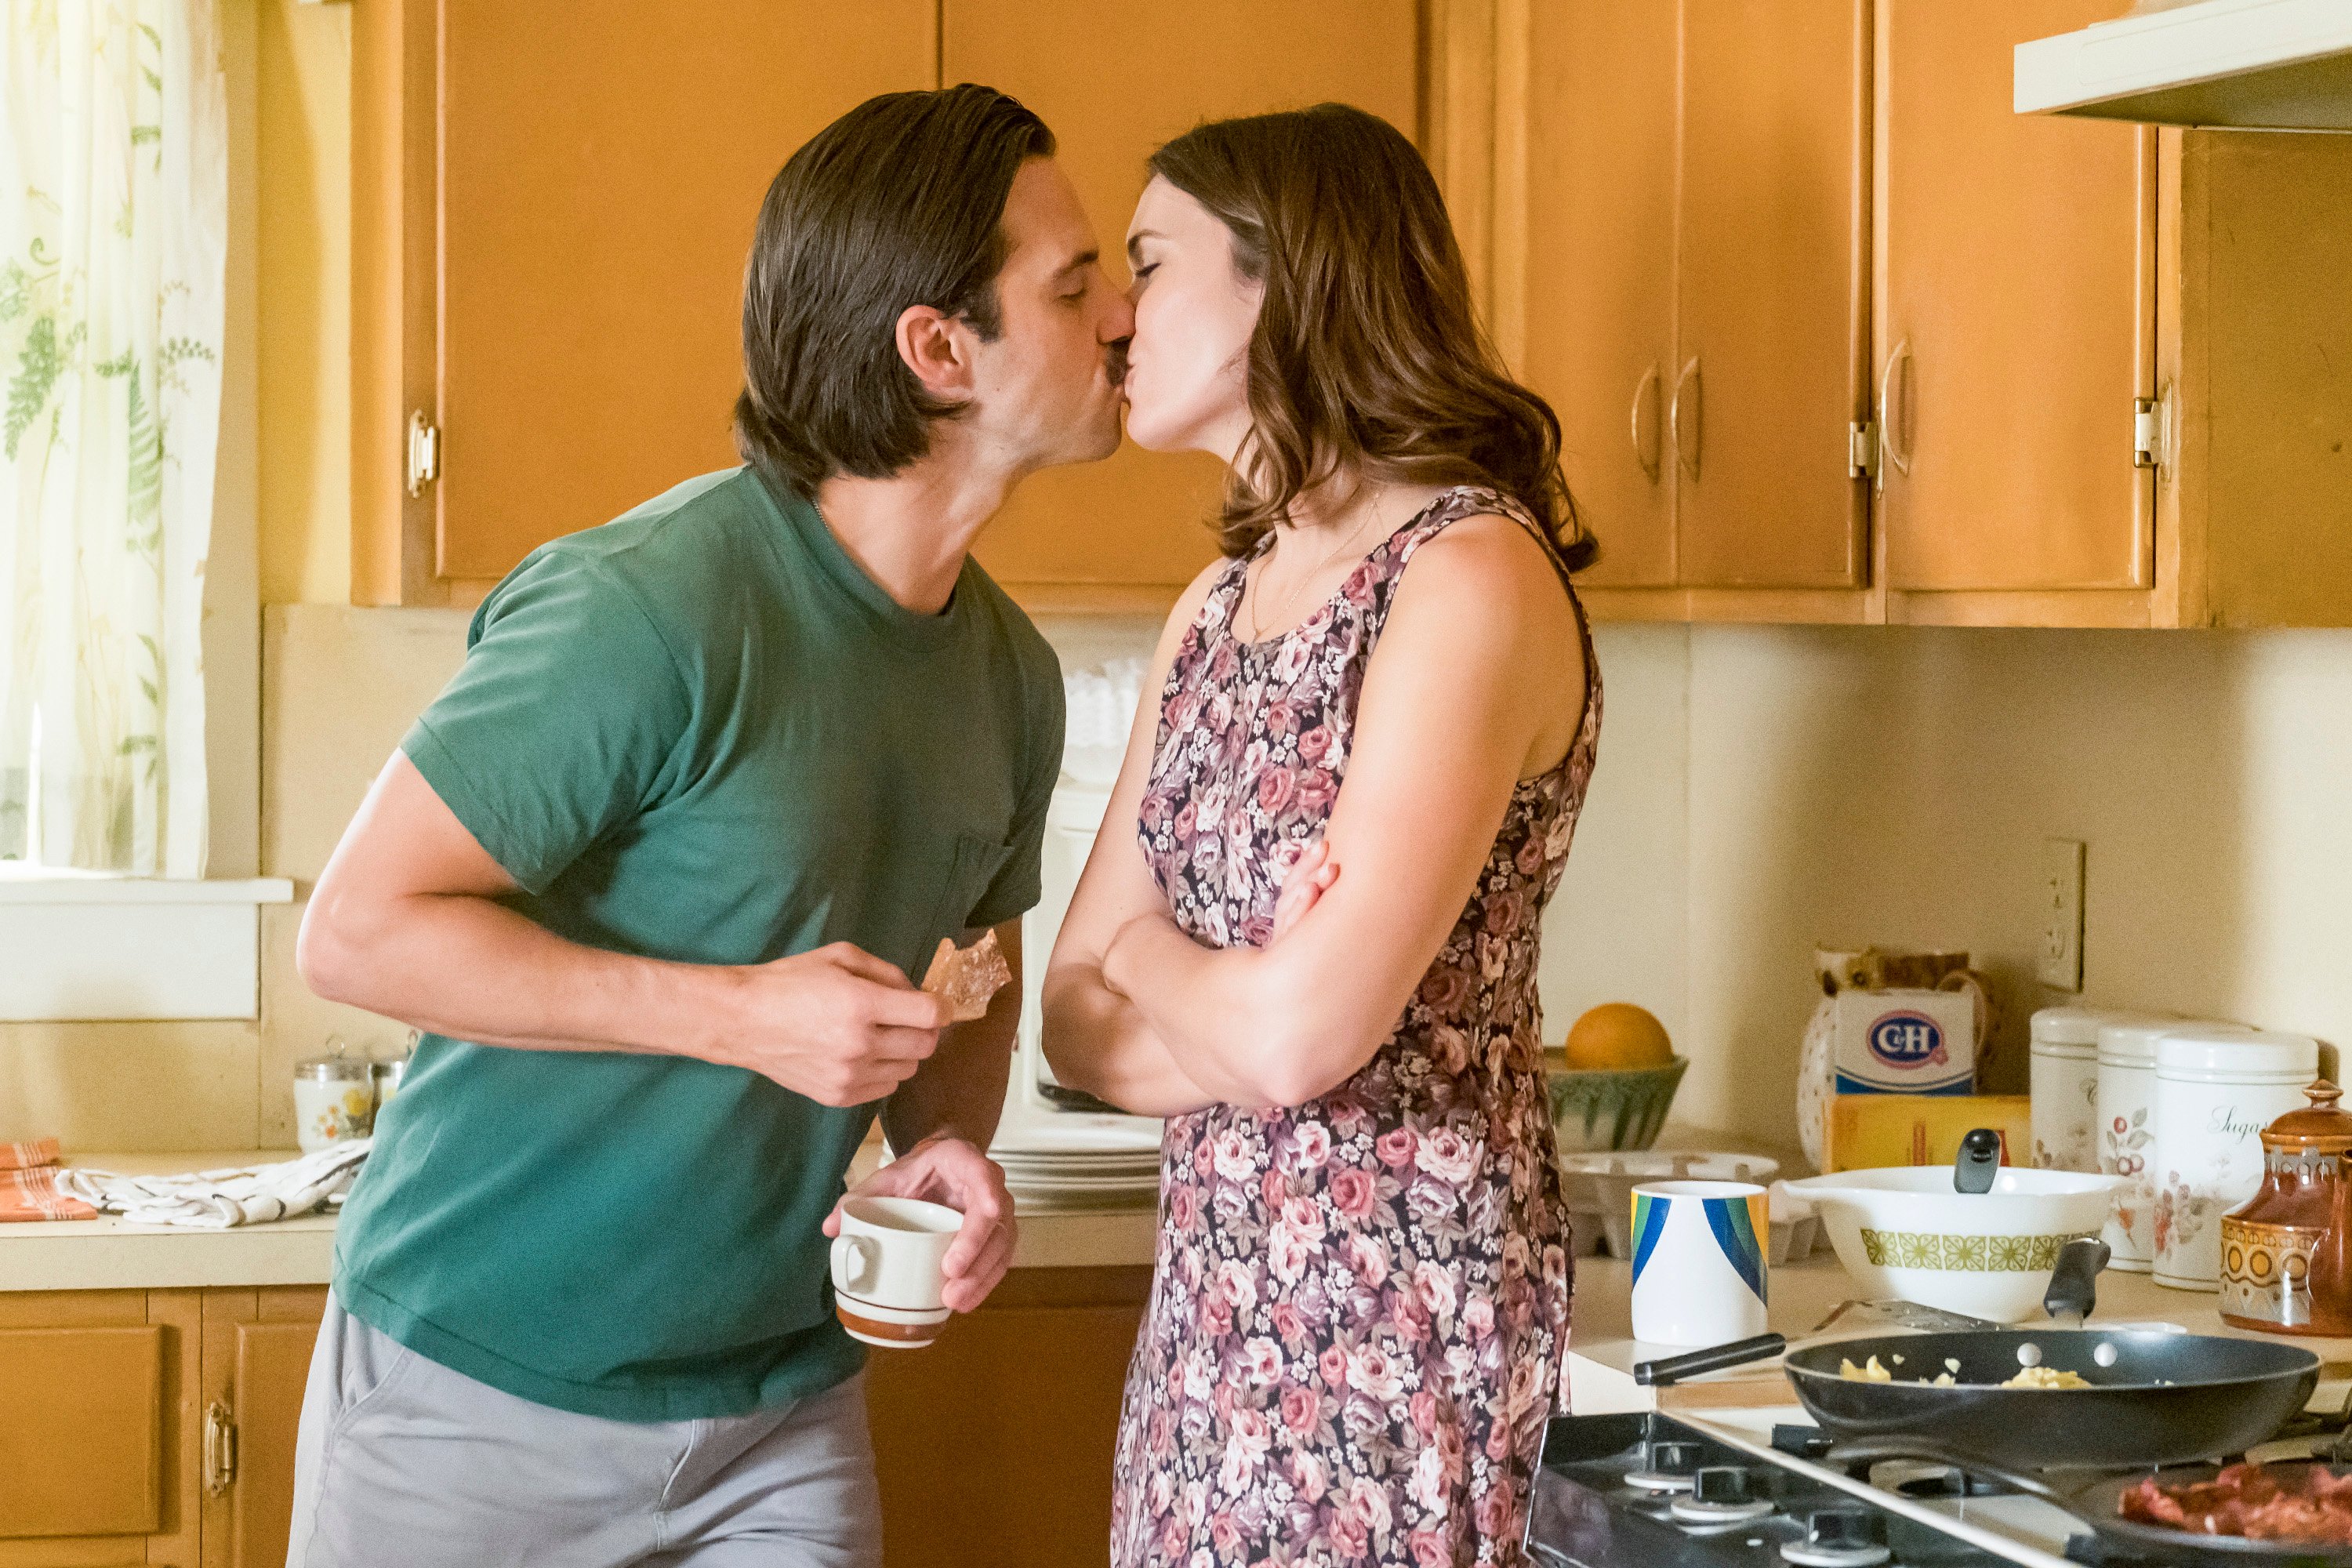 Milo Ventimiglia and Mandy Moore on the set of This Is Us